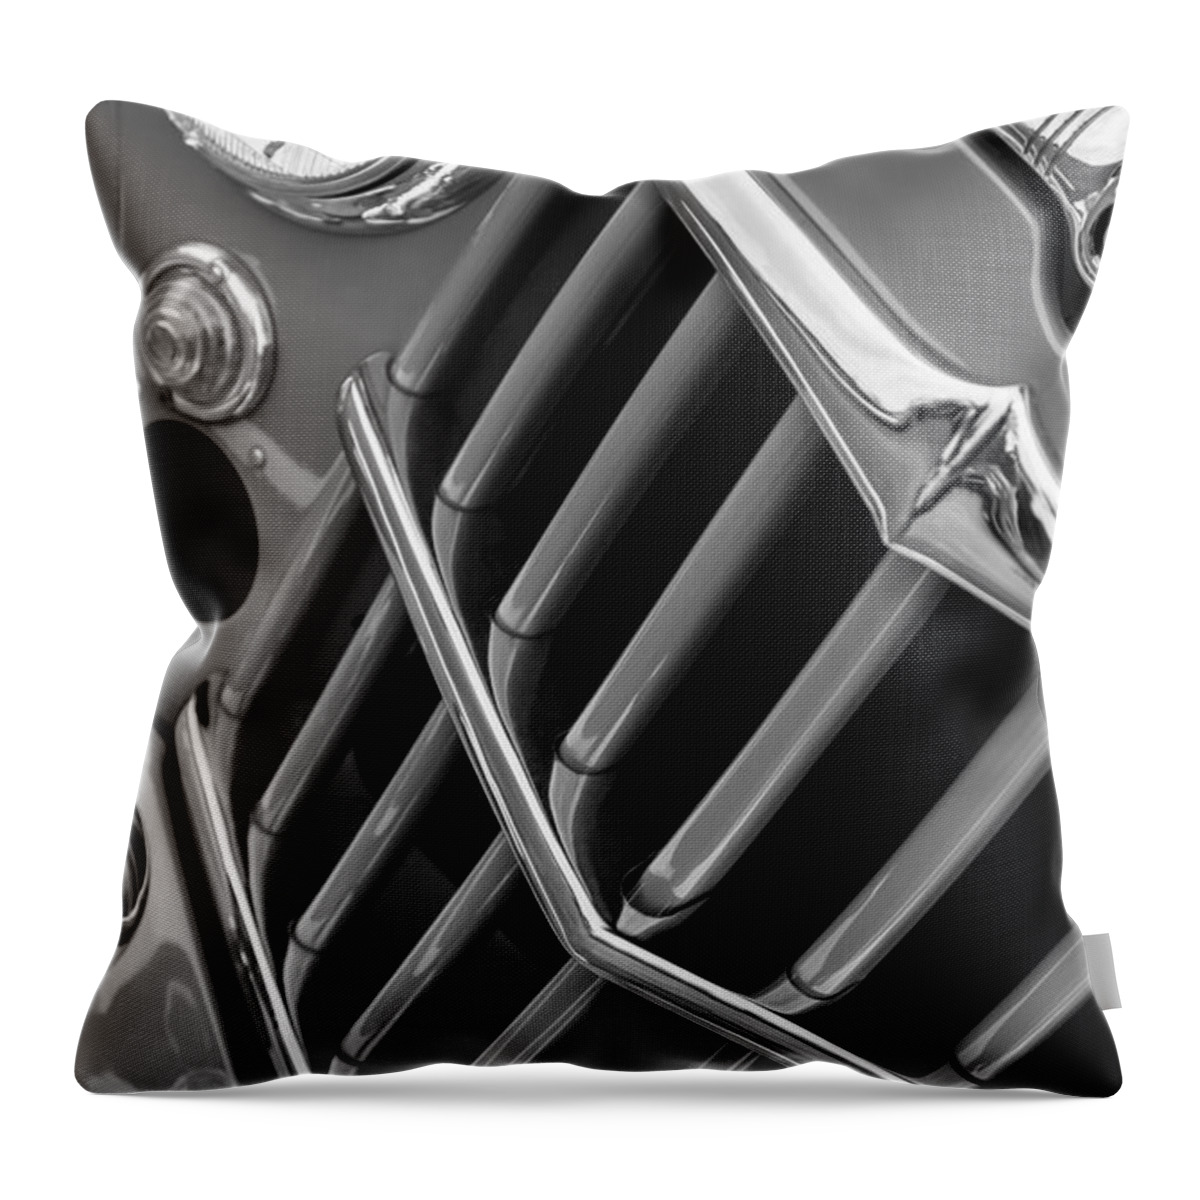 1957 Willys Jeep 6-226 Wagon Grille Emblem Throw Pillow featuring the photograph 1957 Willys Jeep 6-226 Wagon Grille Emblem by Jill Reger